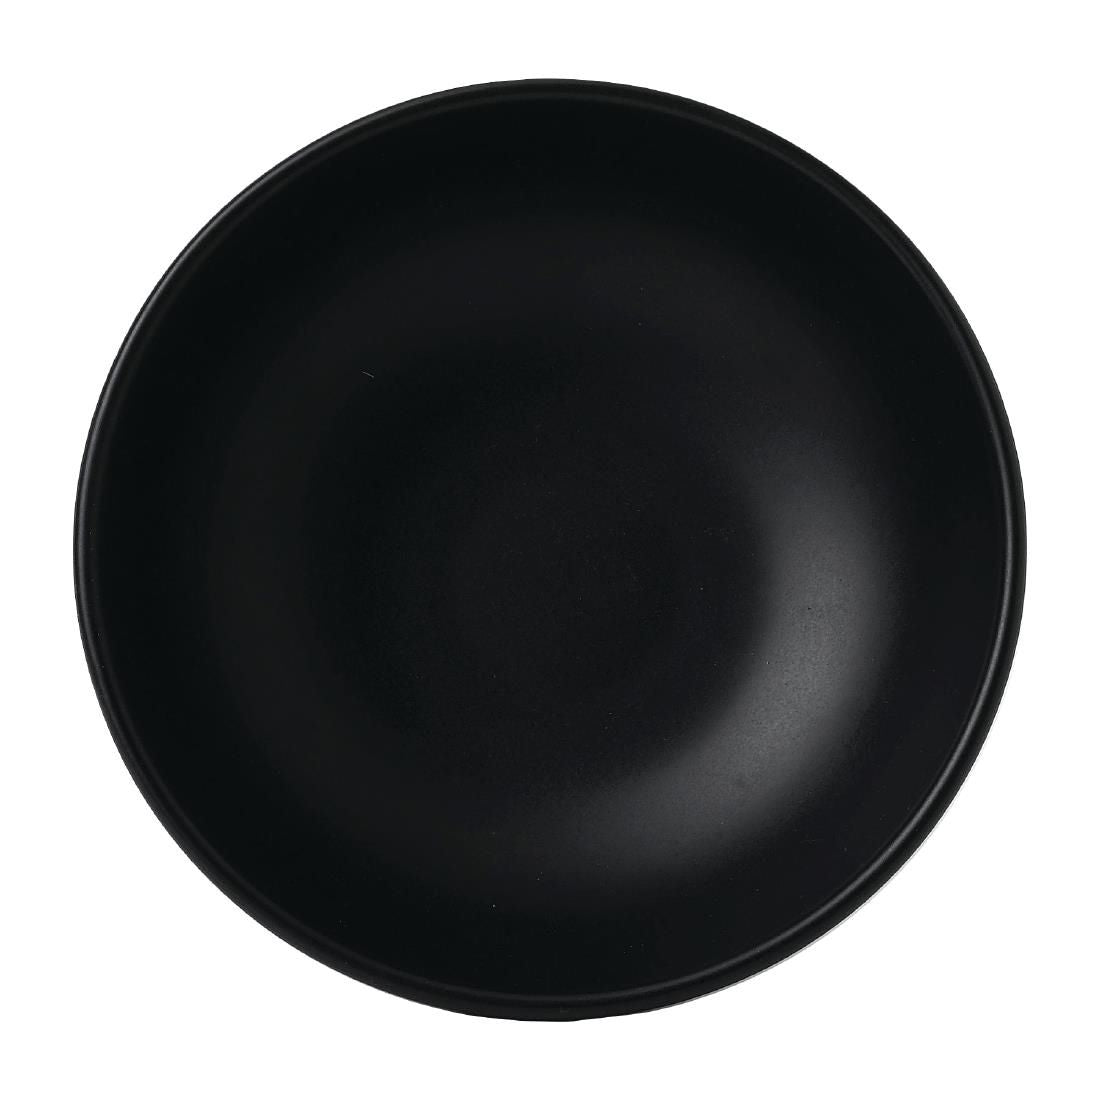 FE327 Dudson Evo Jet Rice Bowl 178mm (Pack of 6) JD Catering Equipment Solutions Ltd